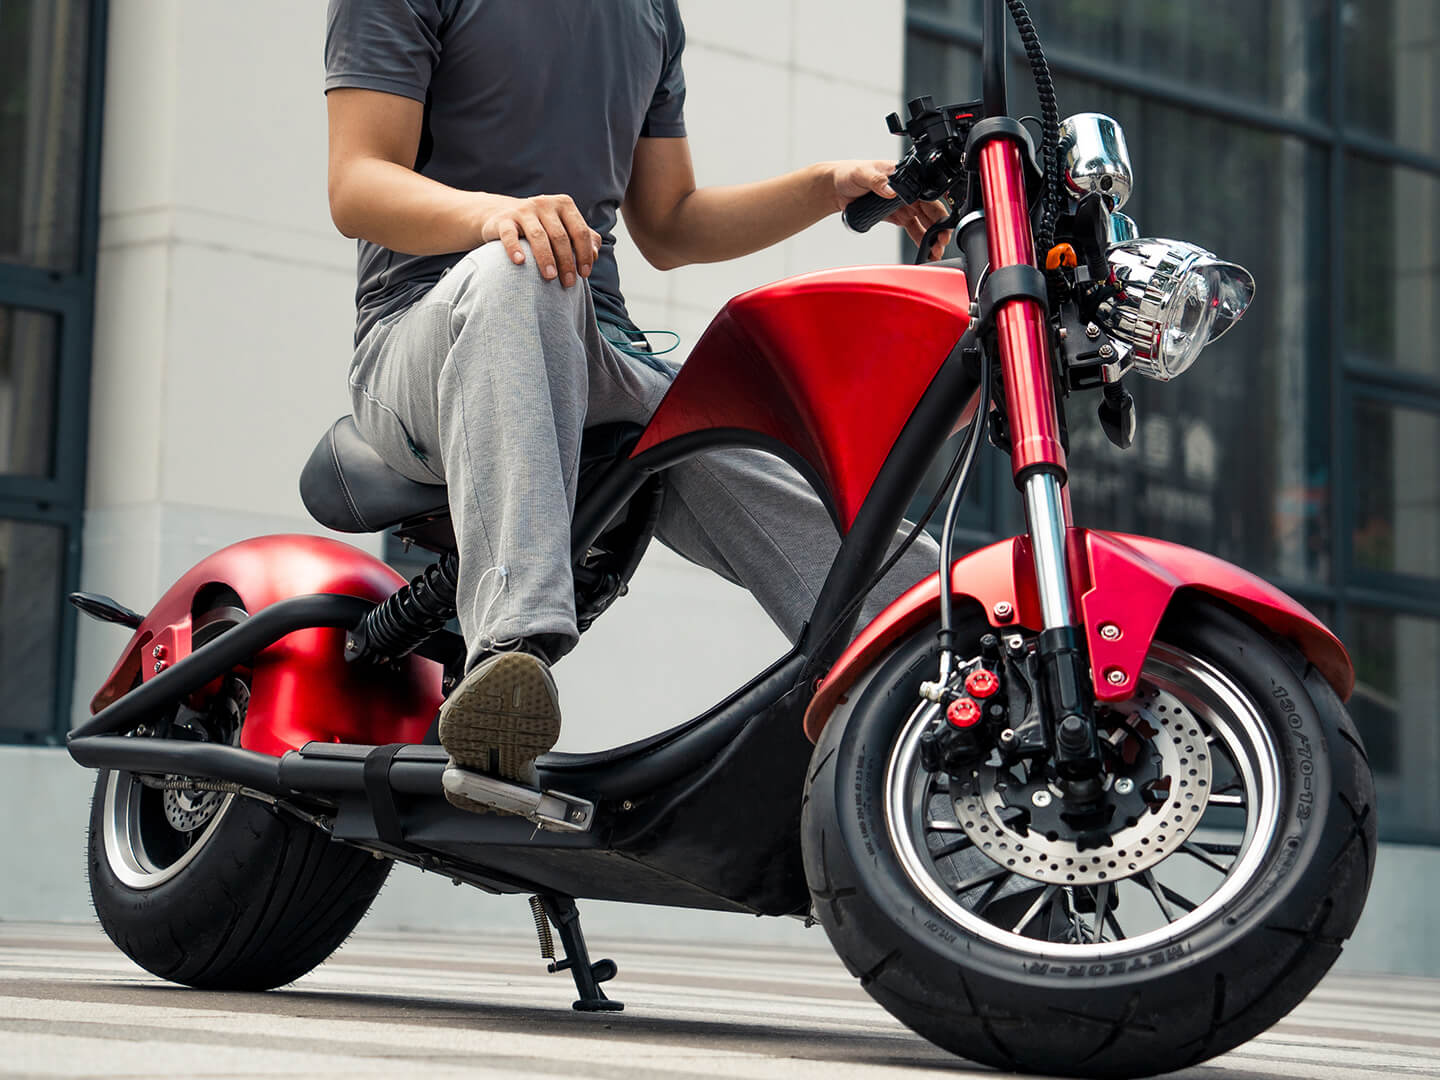 2000W Electric Motorcycle Chopper - Fat Tire Scooter - Eahora Emars M1P 